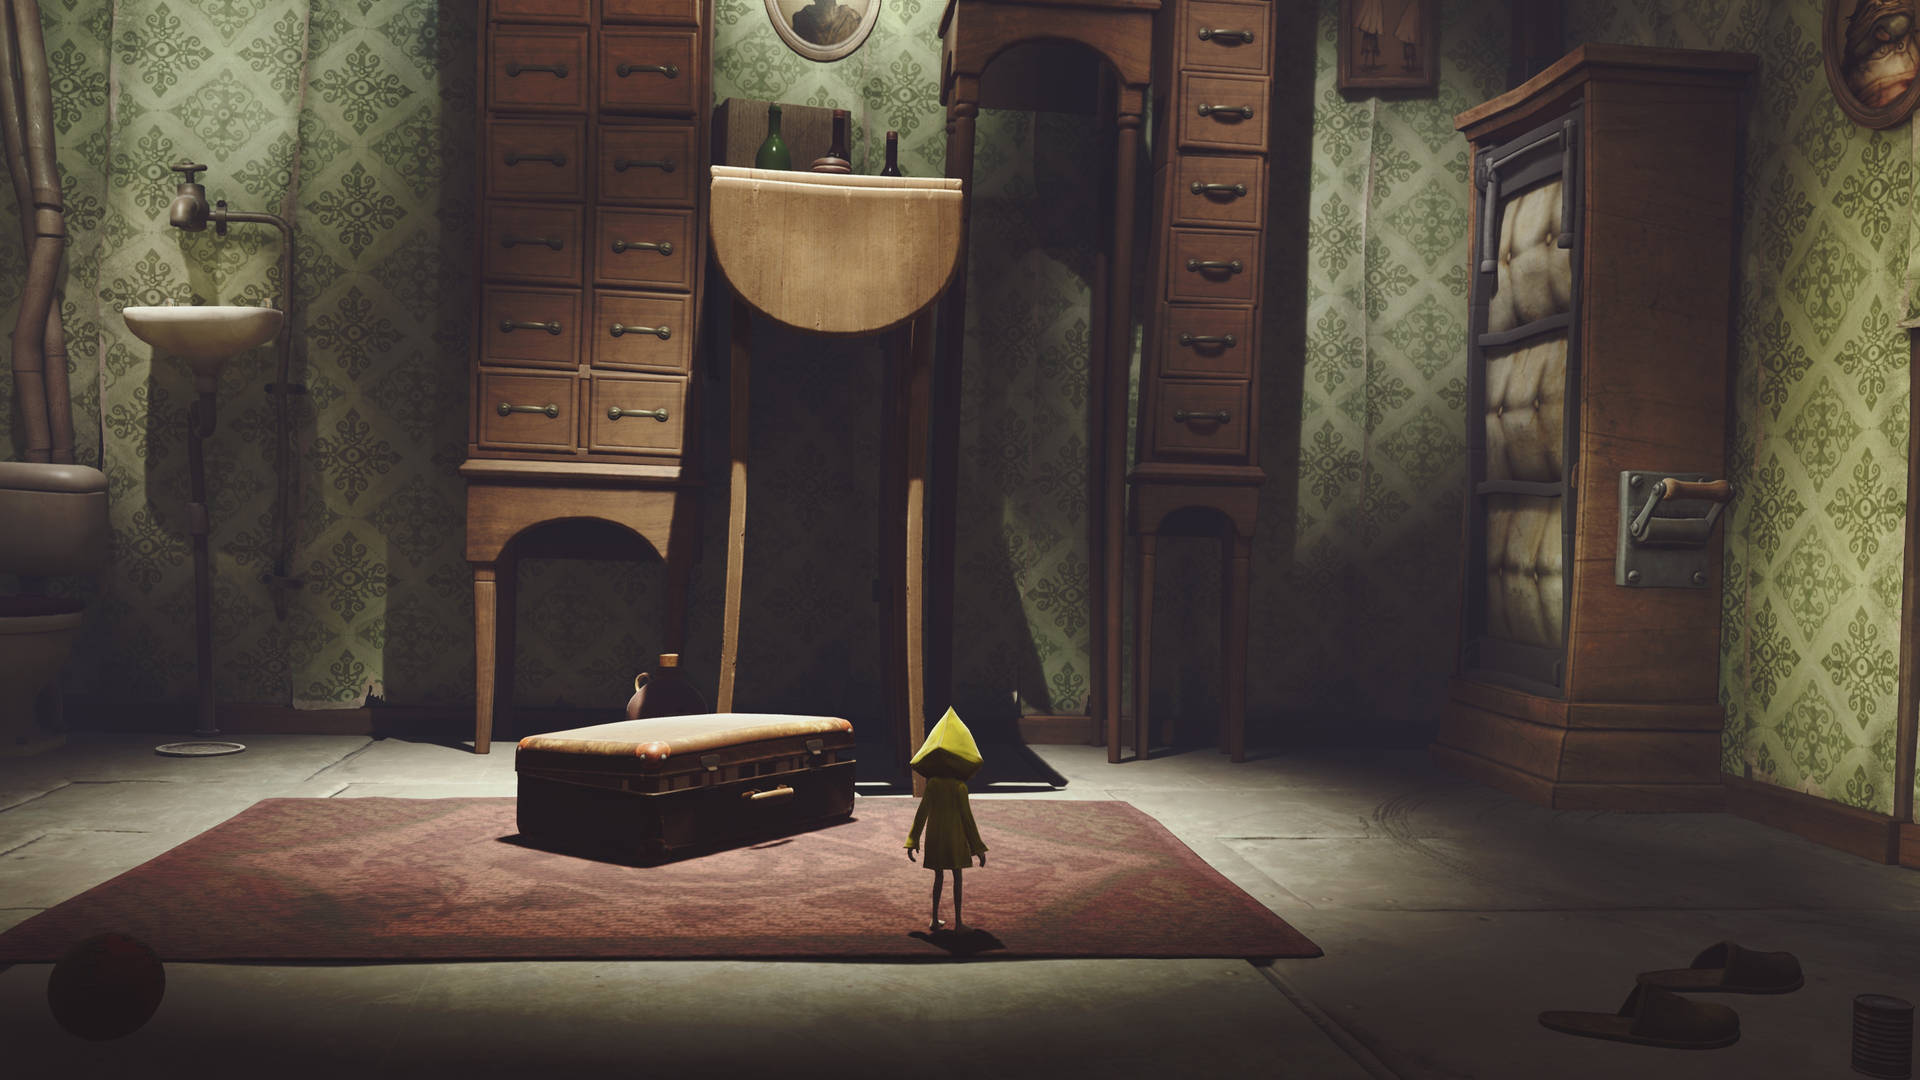 Little Nightmares The Janitor's Room